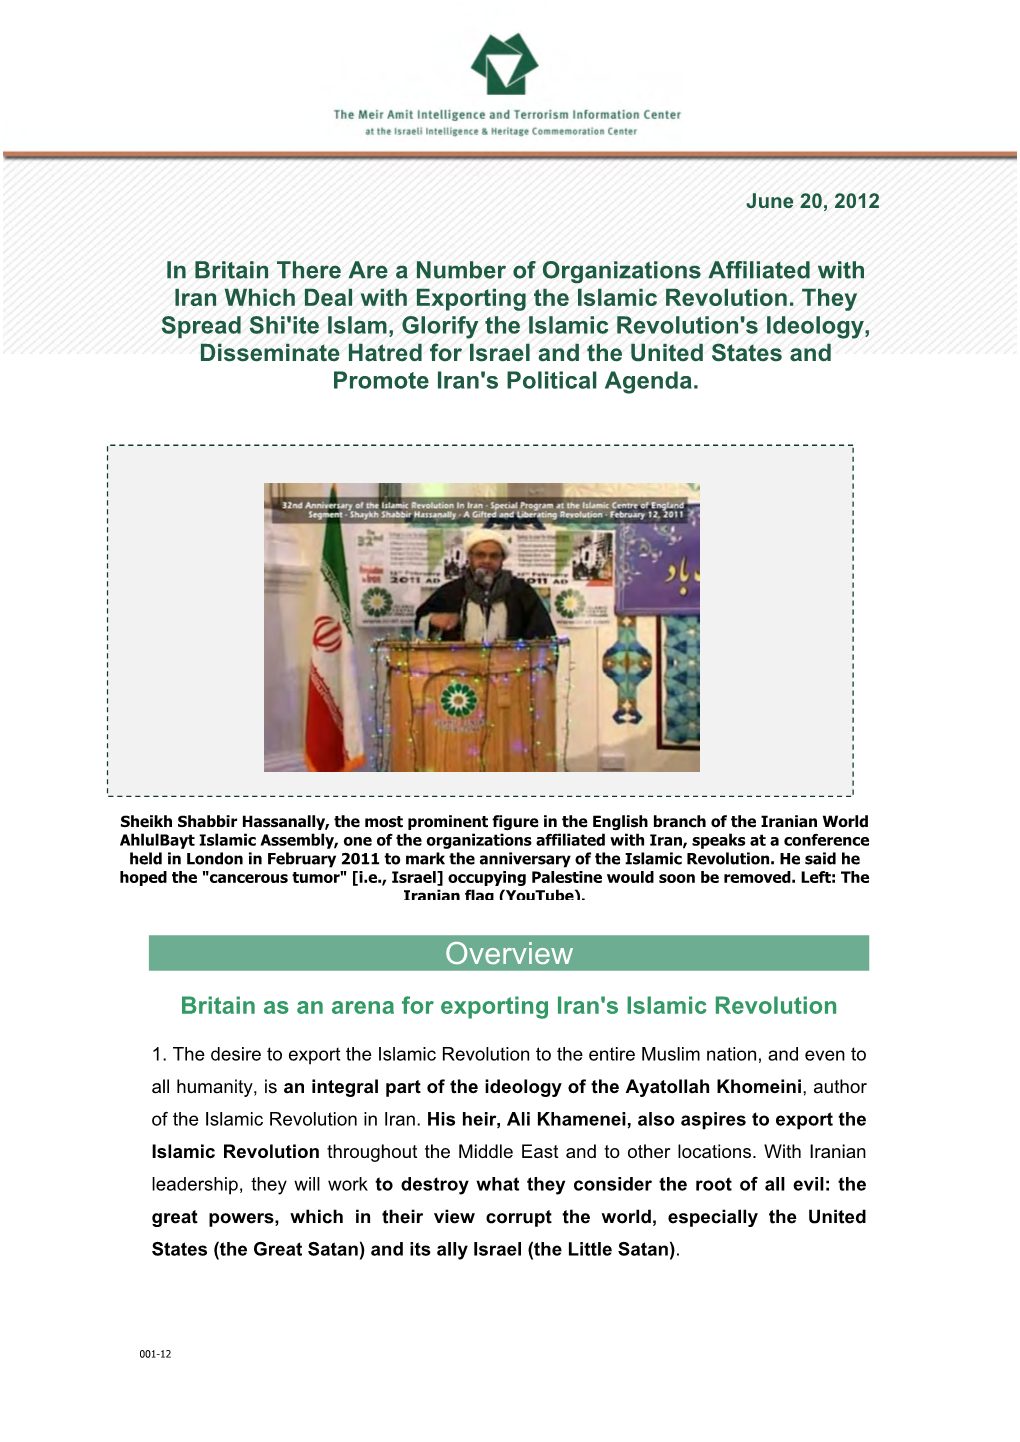 In Britain There Are a Number of Organizations Affiliated with Iran Which Deal with Exporting the Islamic Revolution